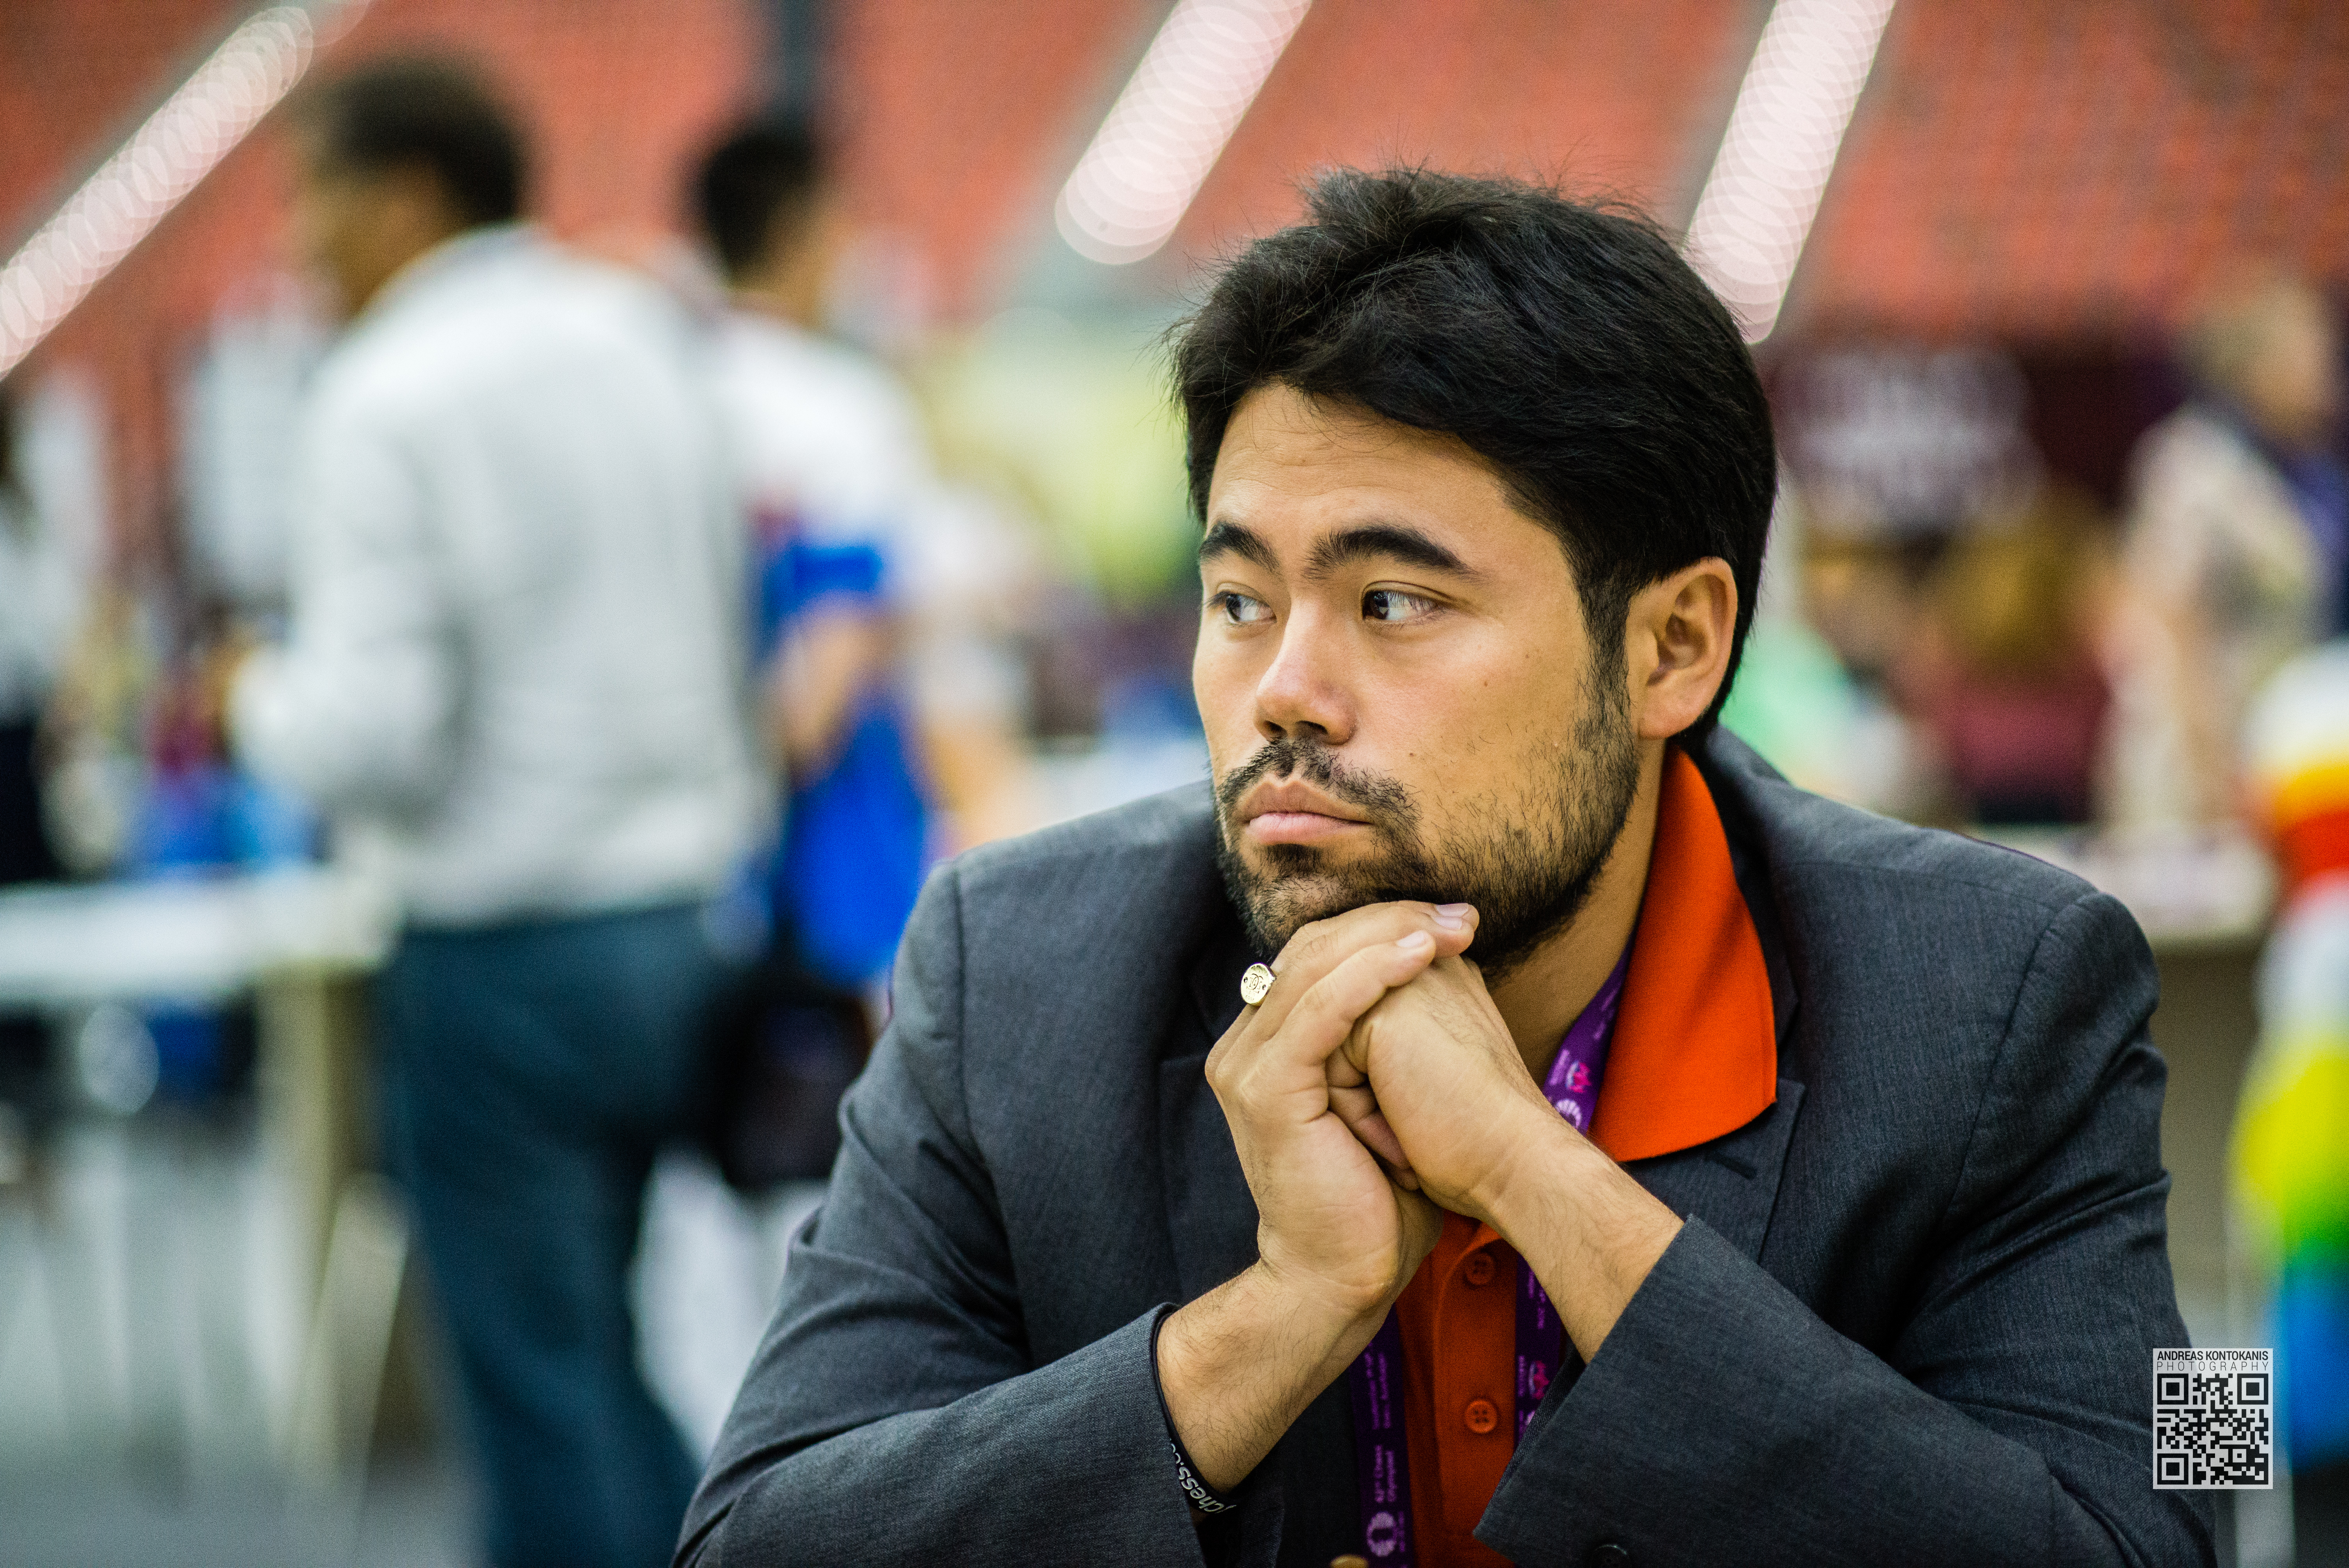 Nakamura Hikaru wearing a suit looking off into the distance